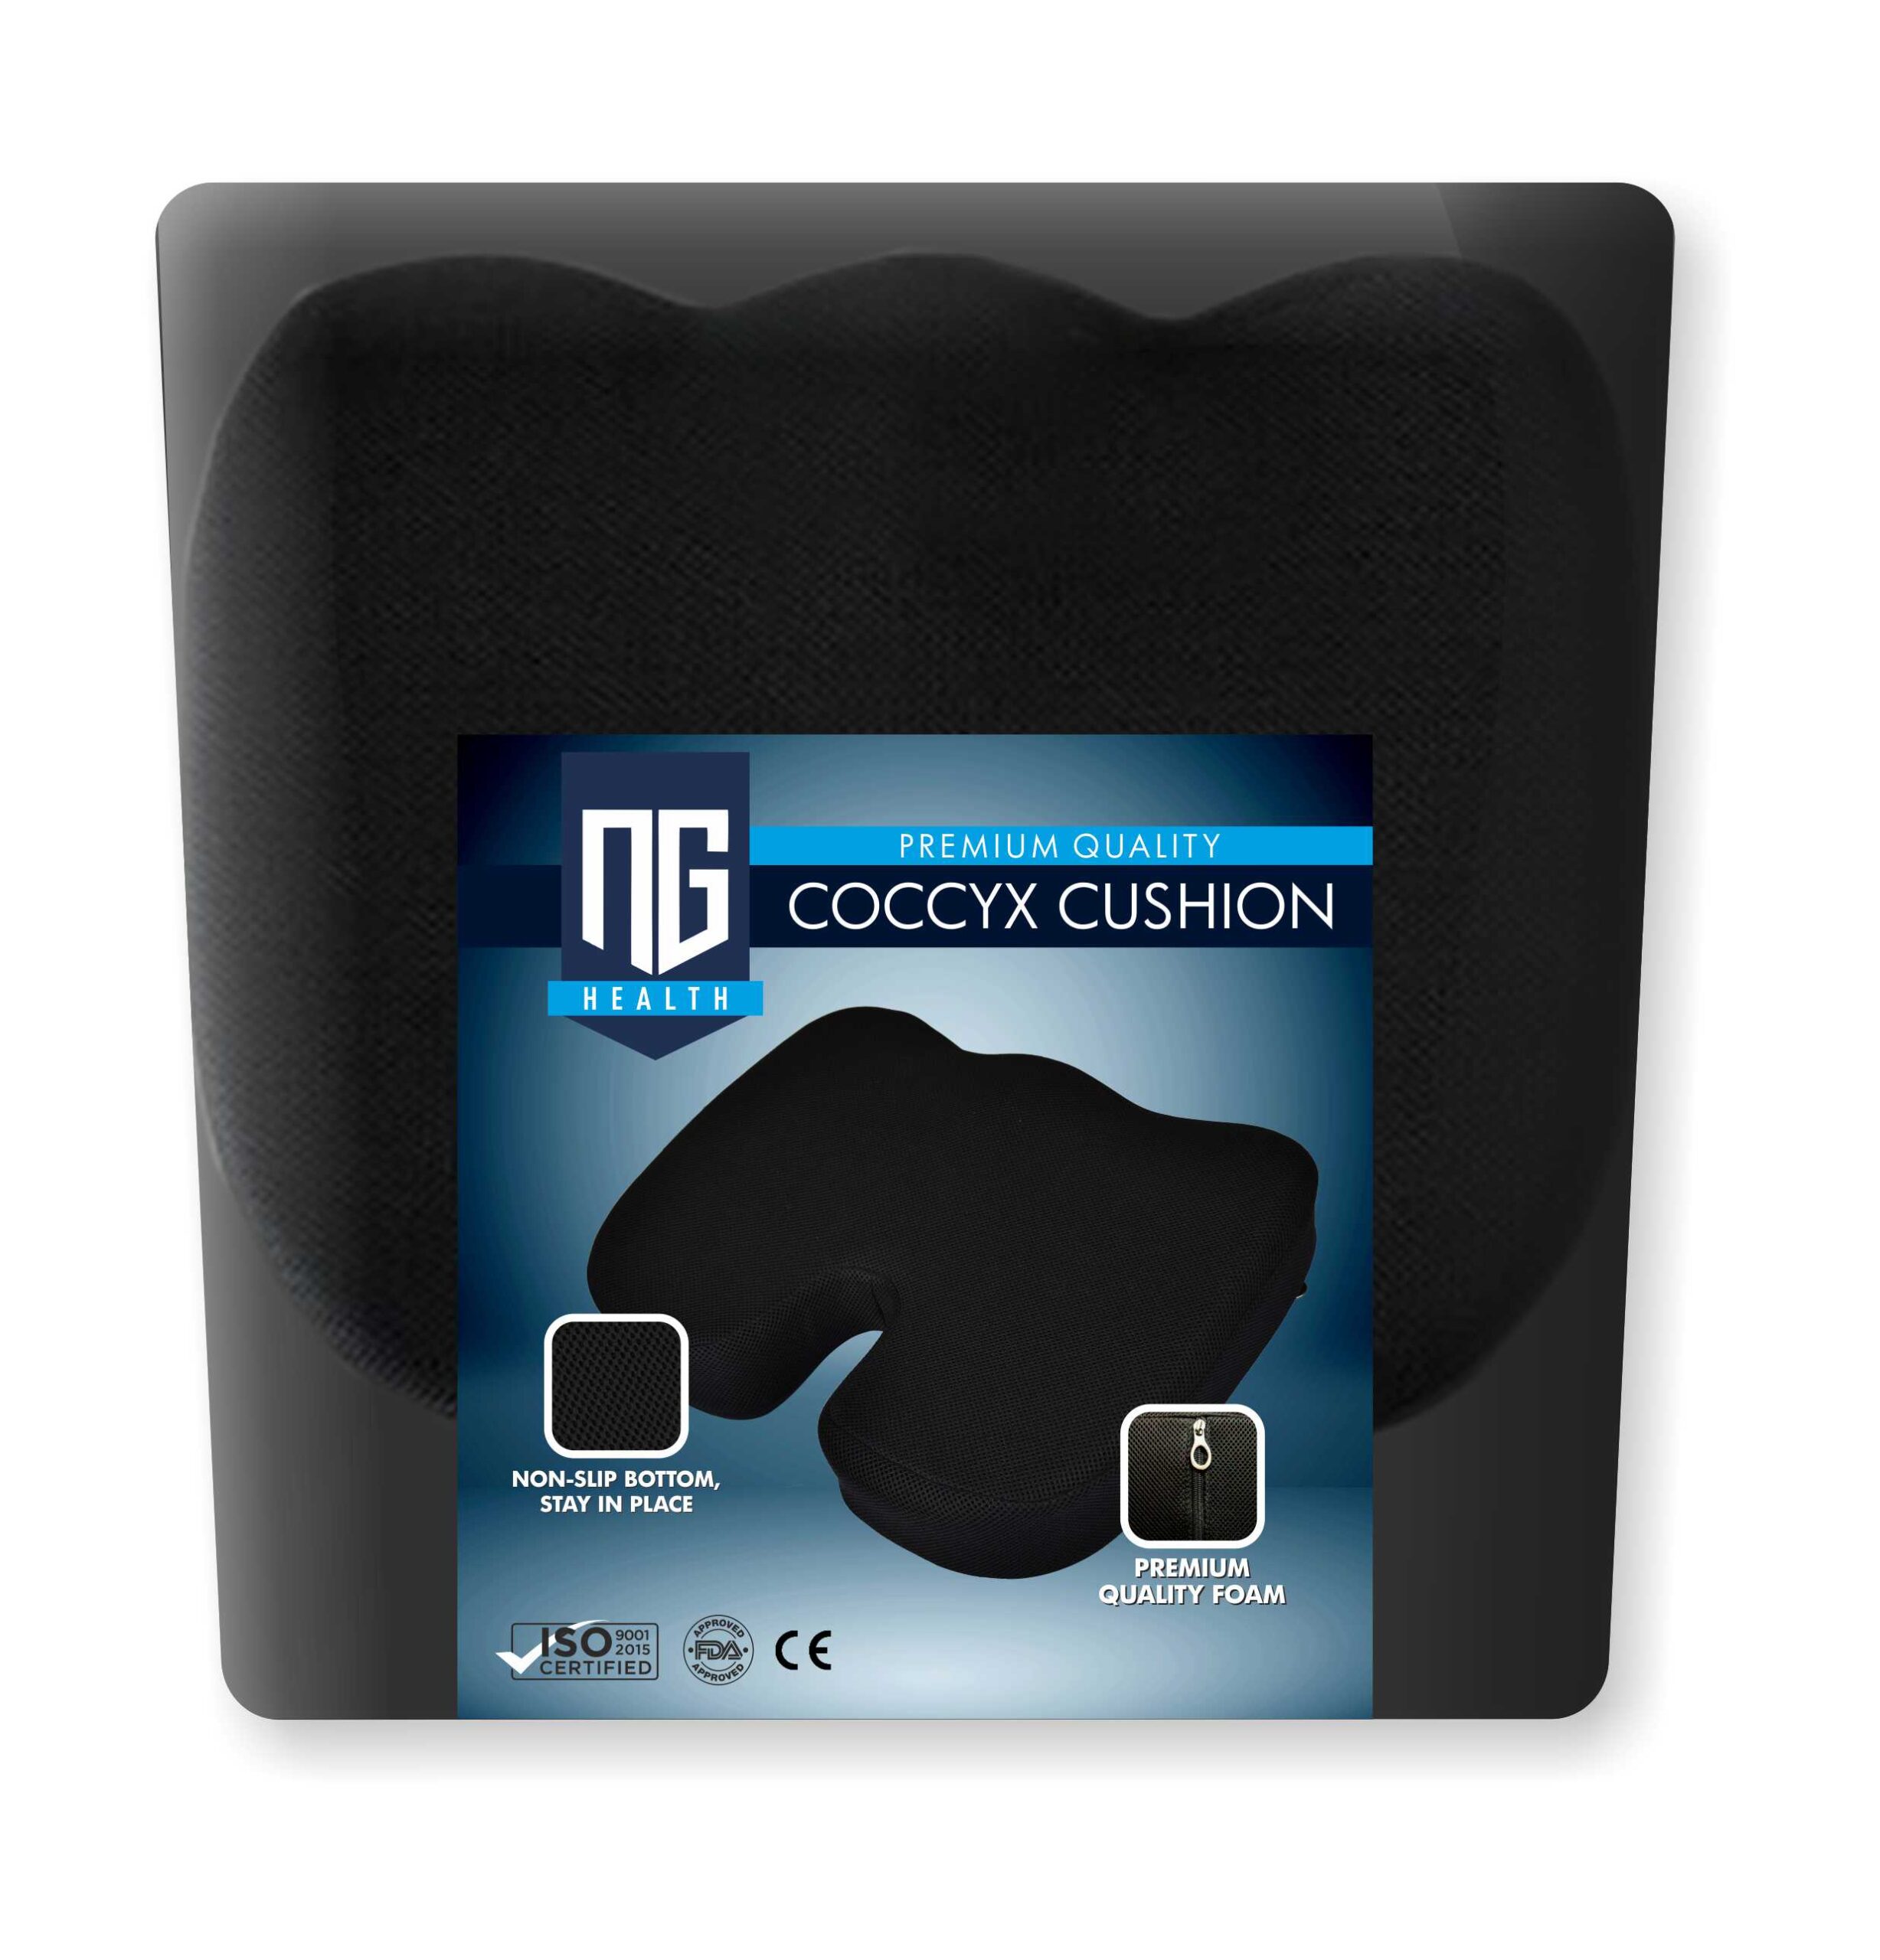 https://tshealthstore.com/wp-content/uploads/2022/01/coccxy_cushion-scaled.jpg